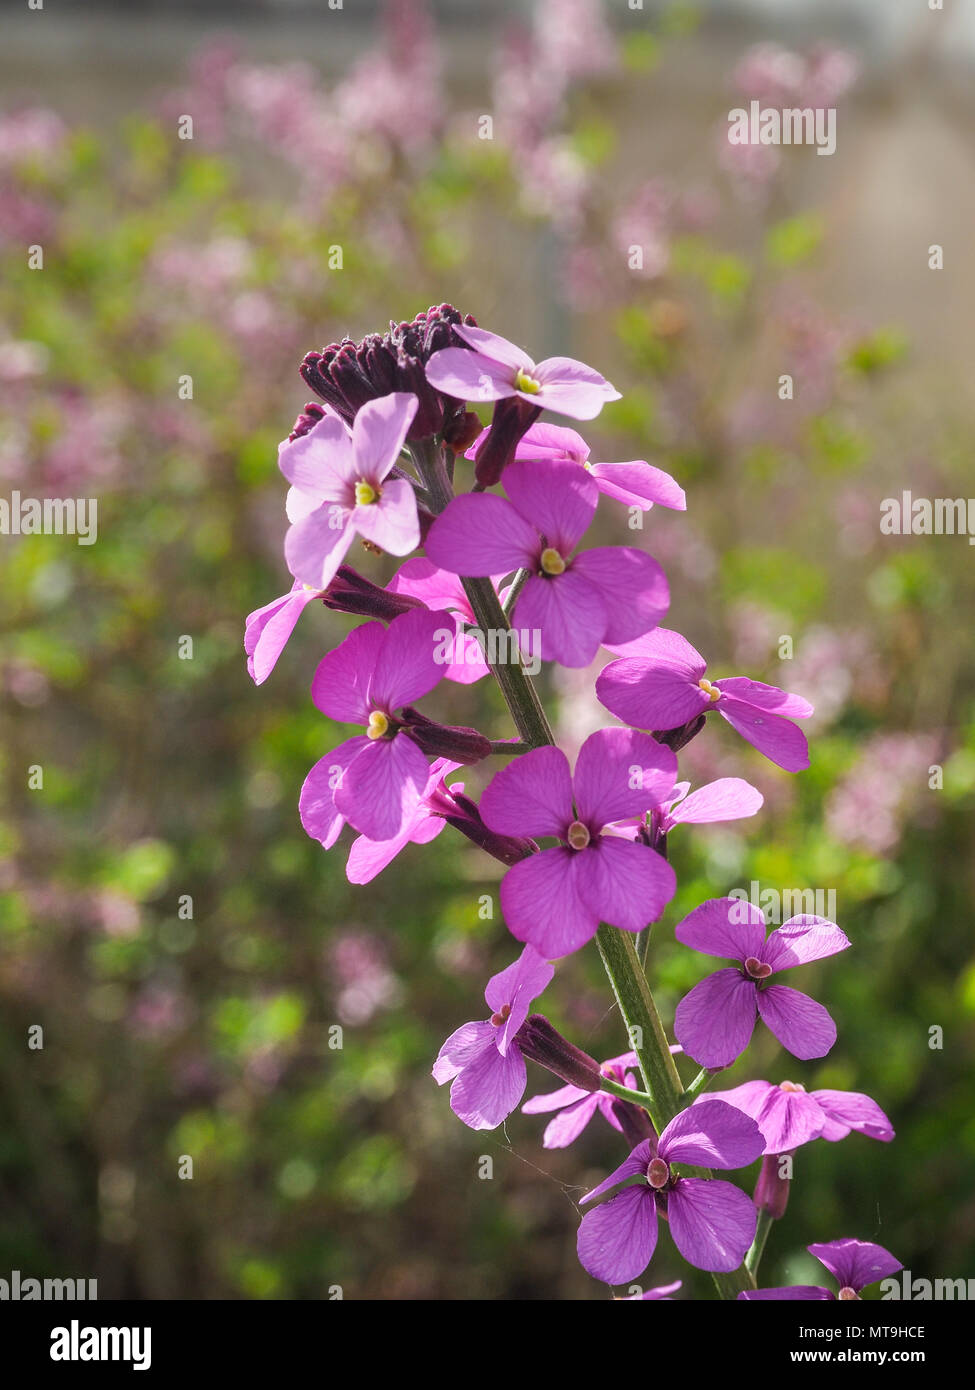 A close up of a flower head of Erysimum Bowles Mauve Stock Photo